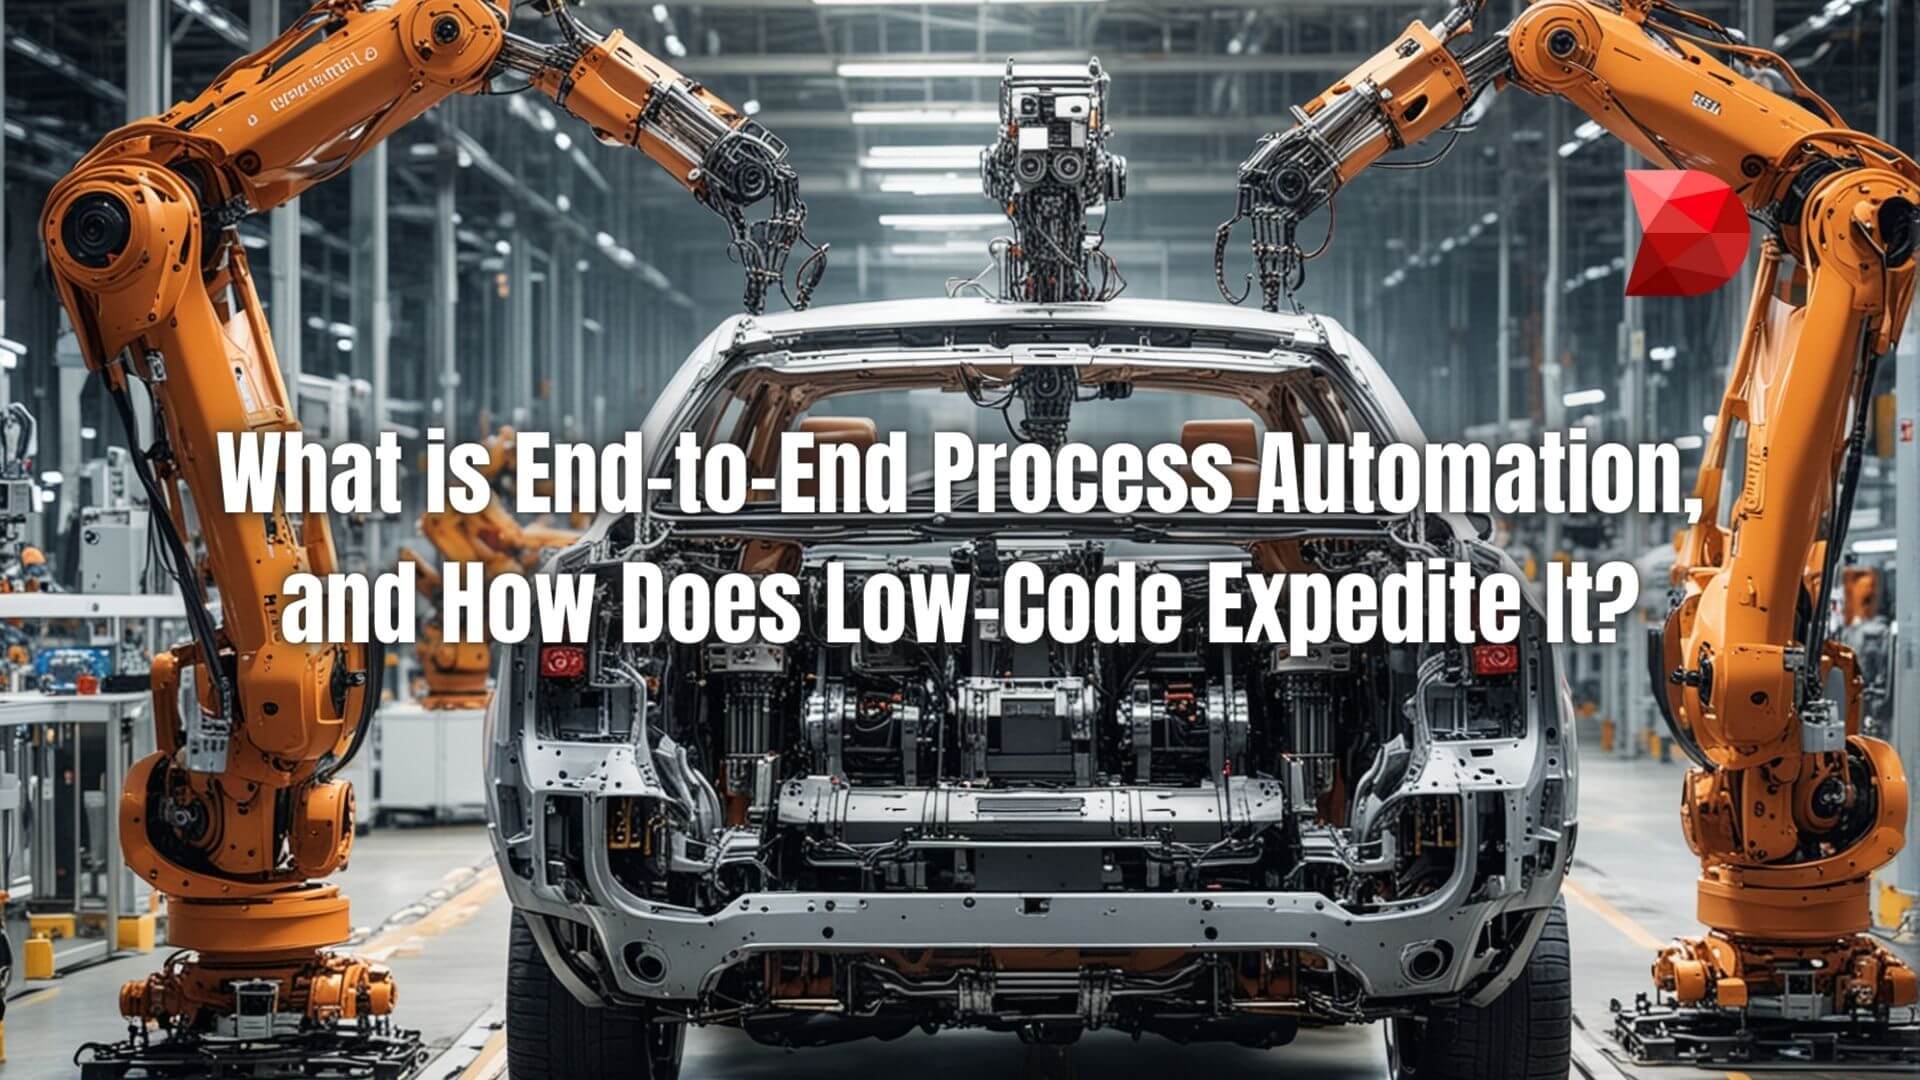 Discover the power of end-to-end process automation and how low-code accelerates it. Unlock efficiency and agility with our complete guide.